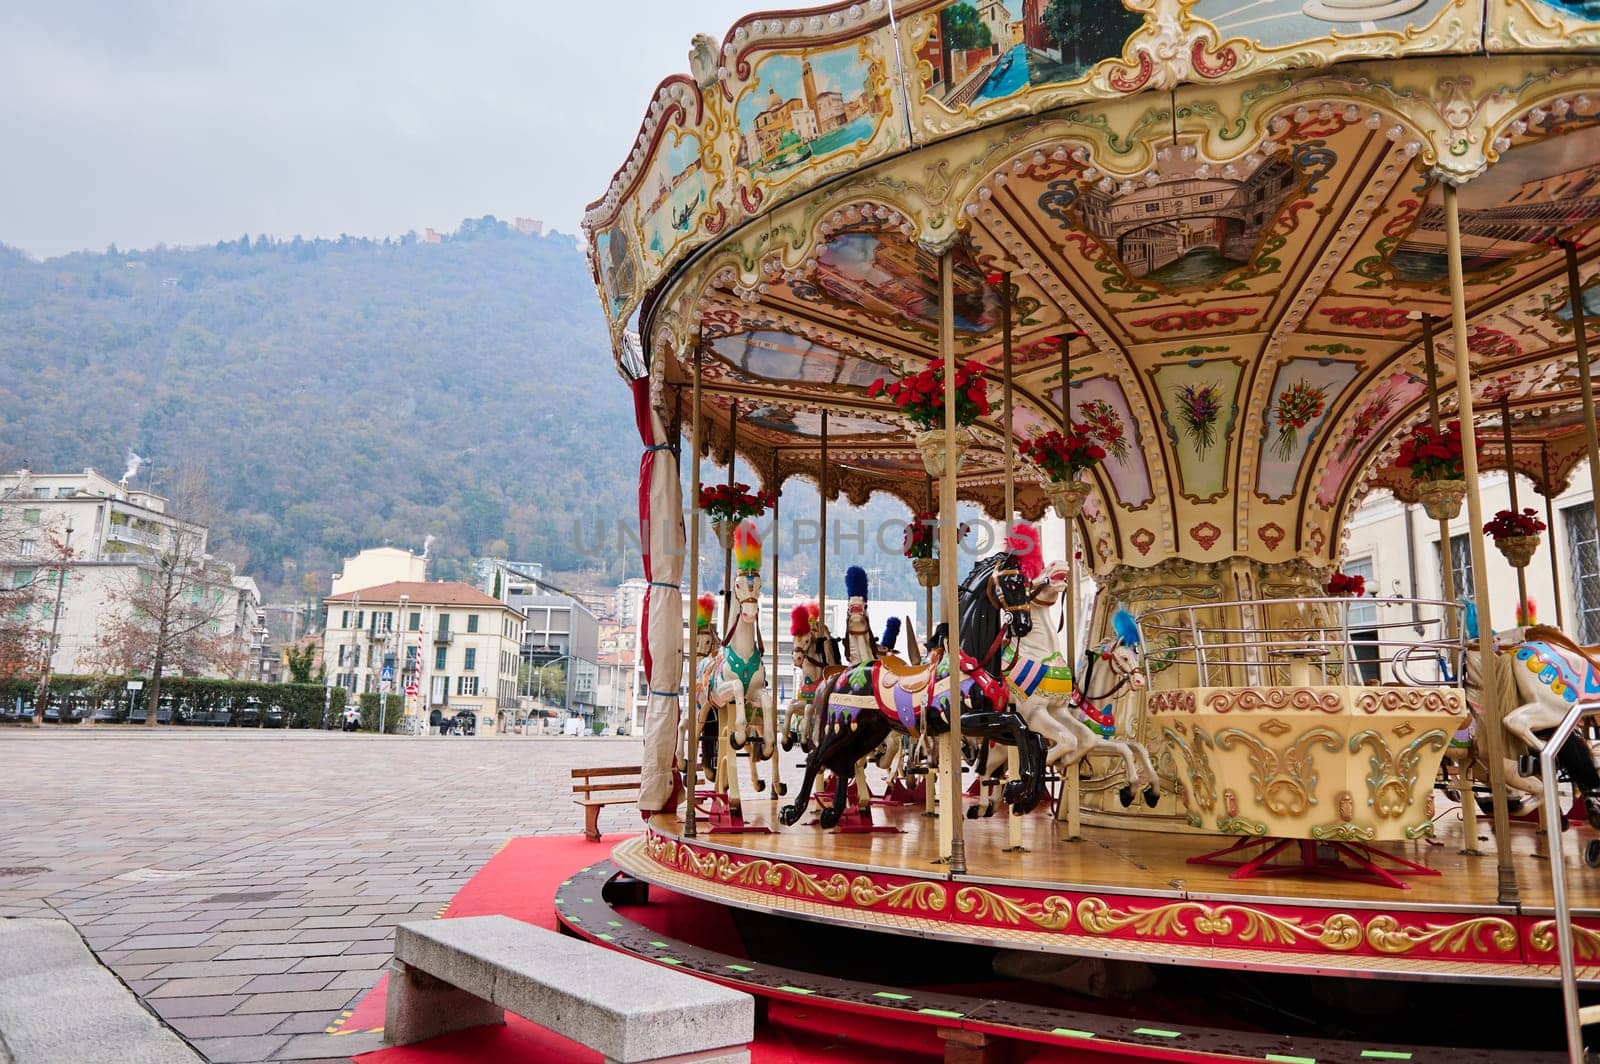 A merry go round, Victorian carousel at Christmas fairground in Como, against Italian Alps backdrop on cloudy winter day by artgf